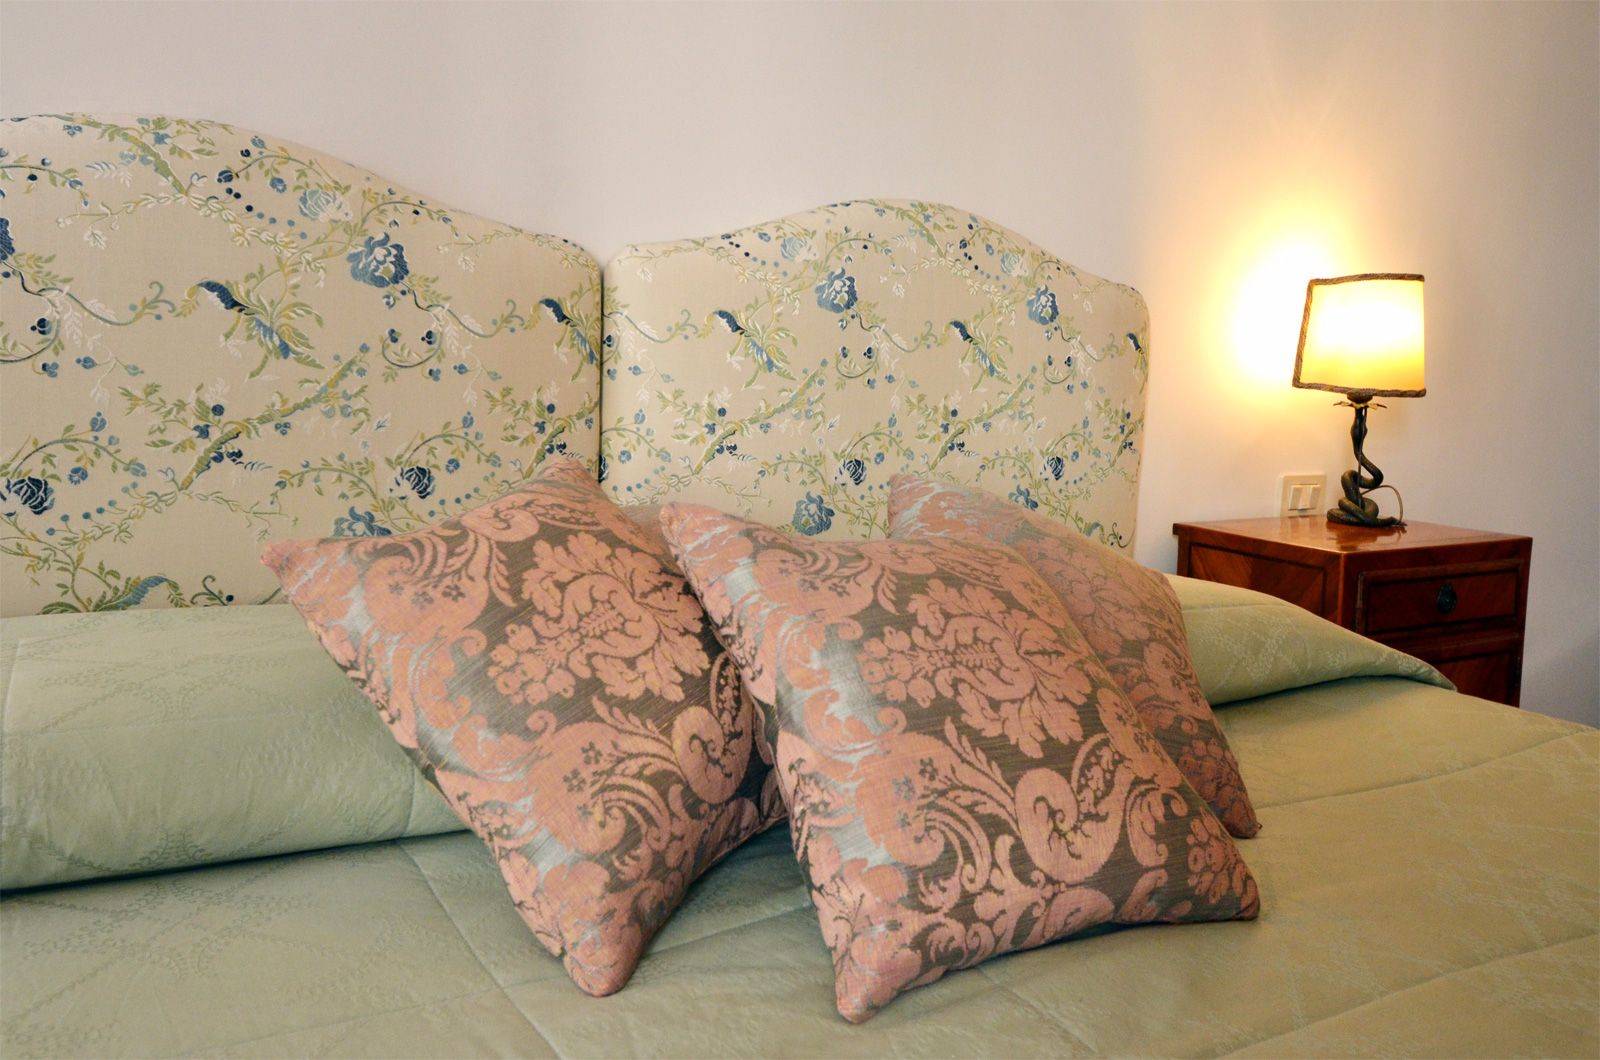 precious Fortuny textiles and soft colors for your total comfort